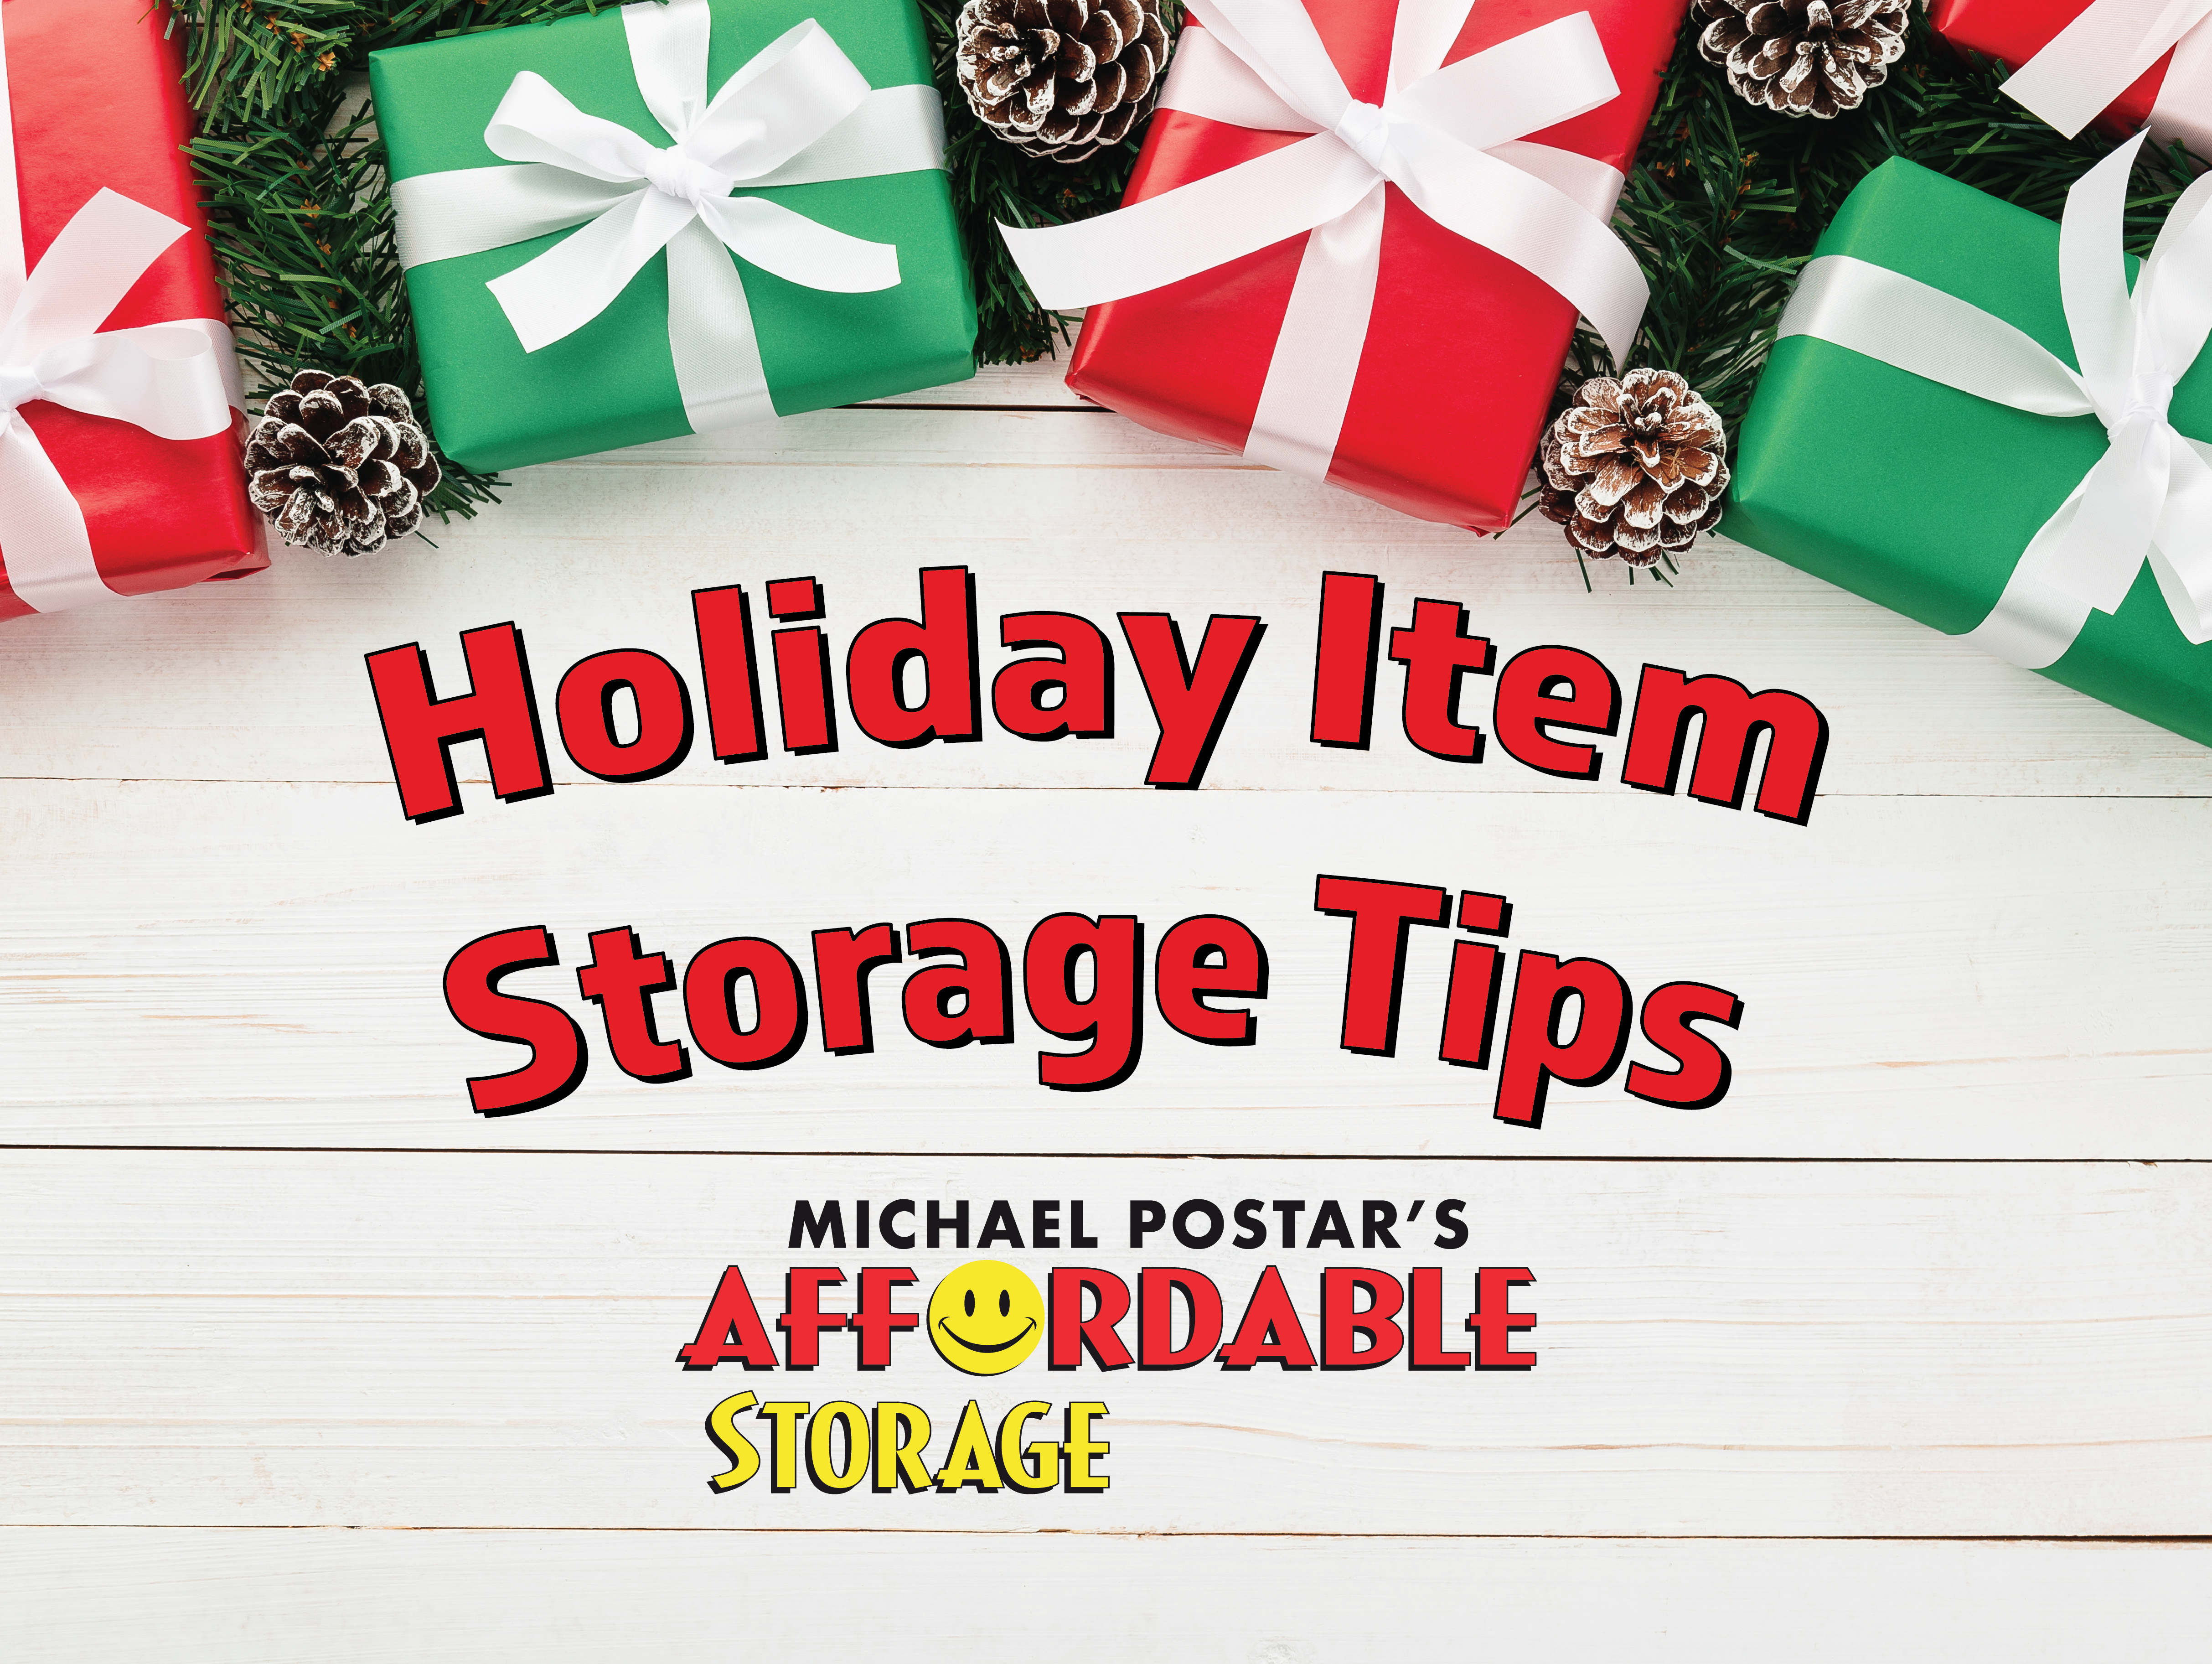 Holiday storage tips brought to you by Affordable Storage